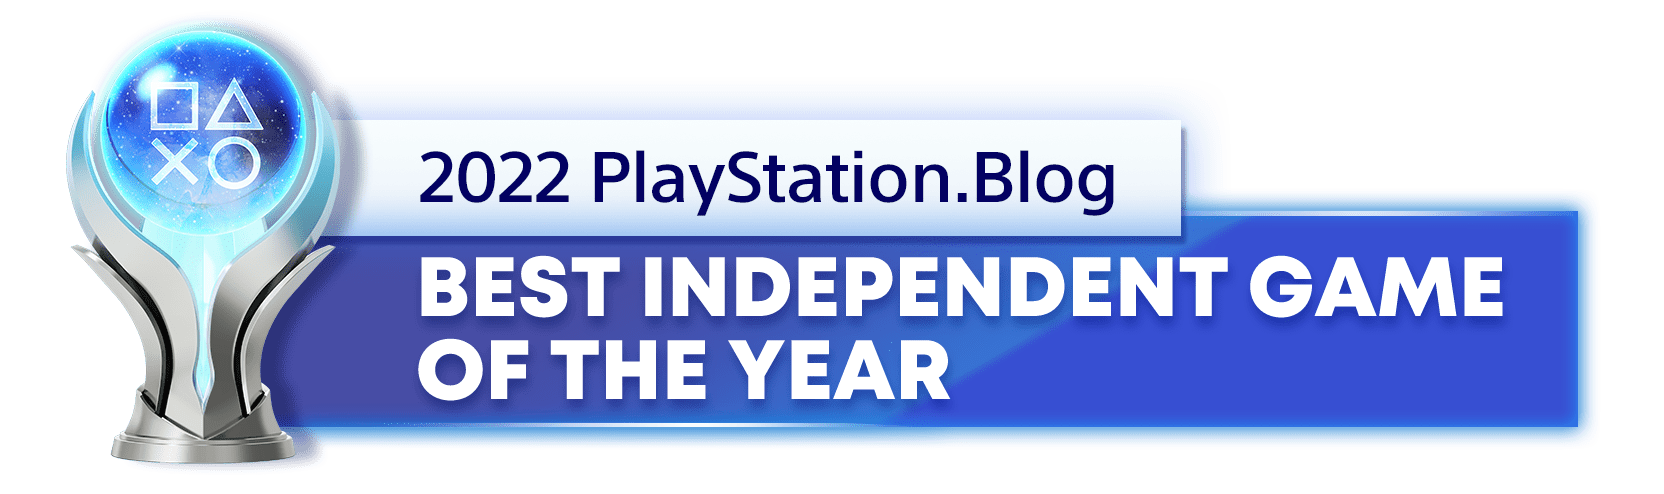 PlayStation Blog's 2022 Platinum trophy for best independent game of the year